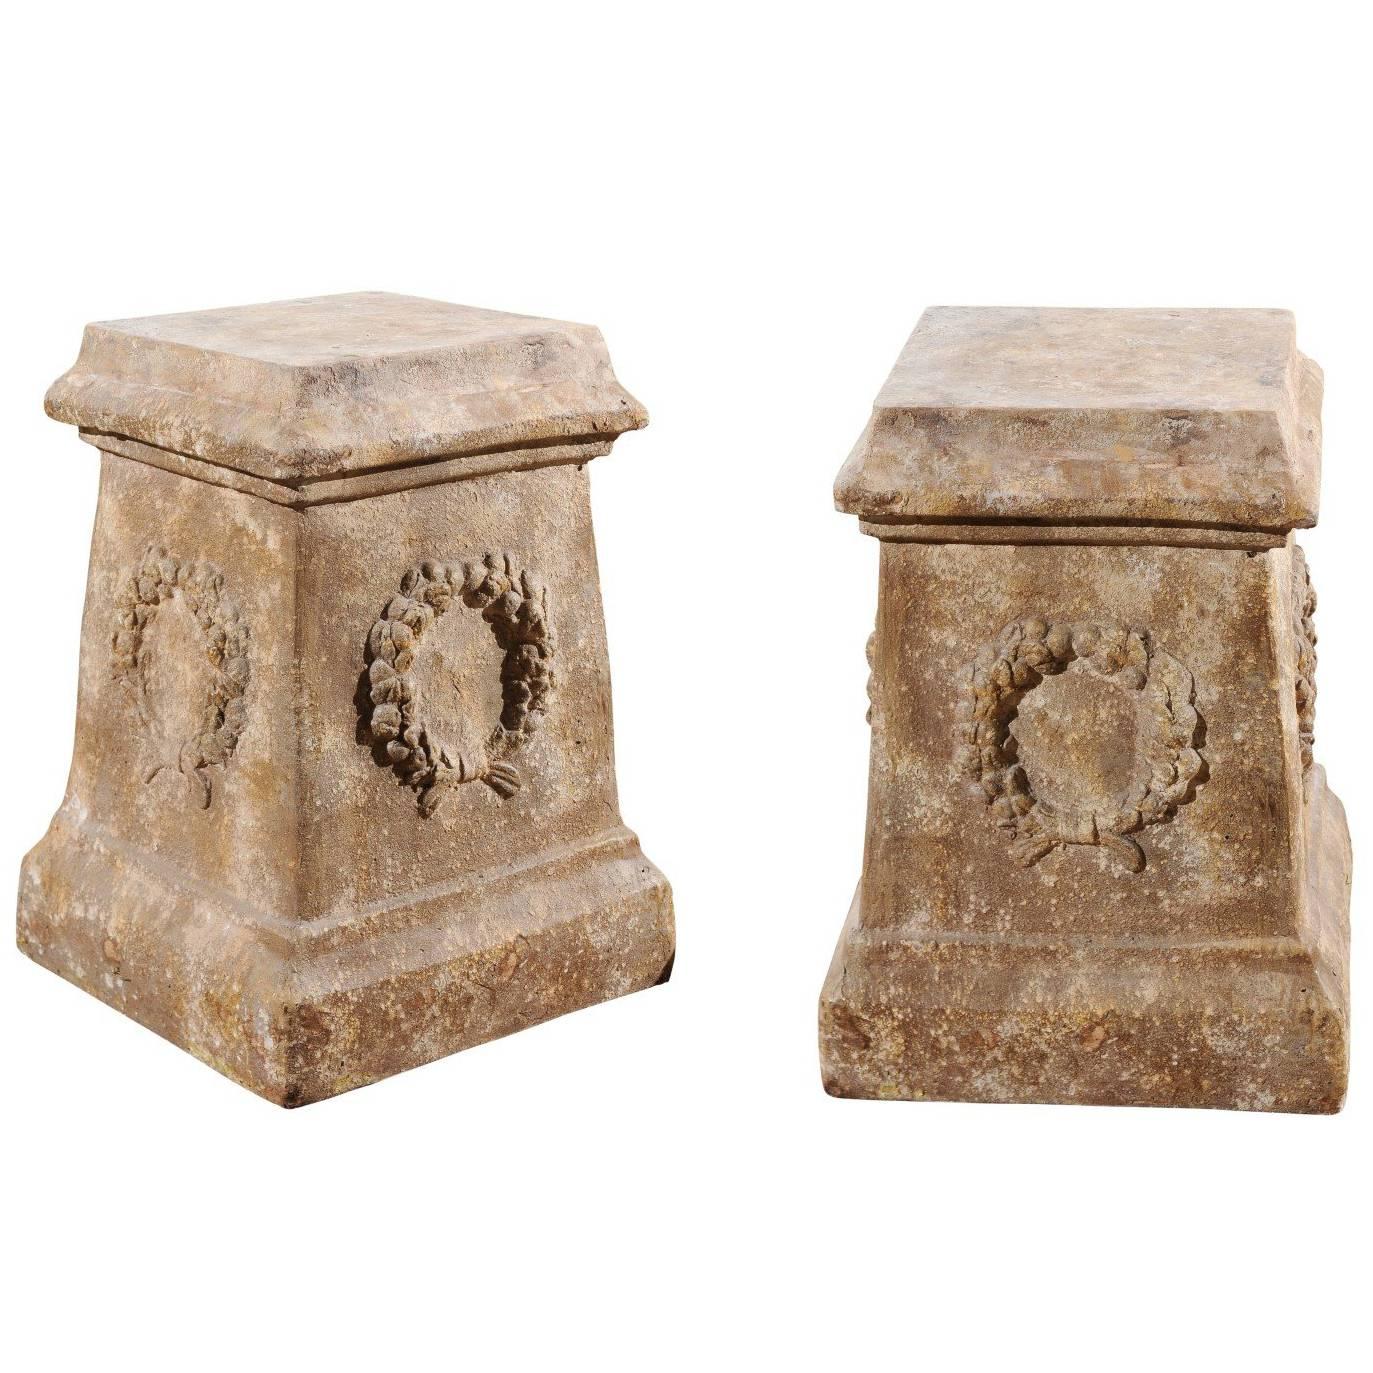 Pair of Vintage Continental Faux Stone Garden Plinths with Wreath Motifs, 1960s For Sale